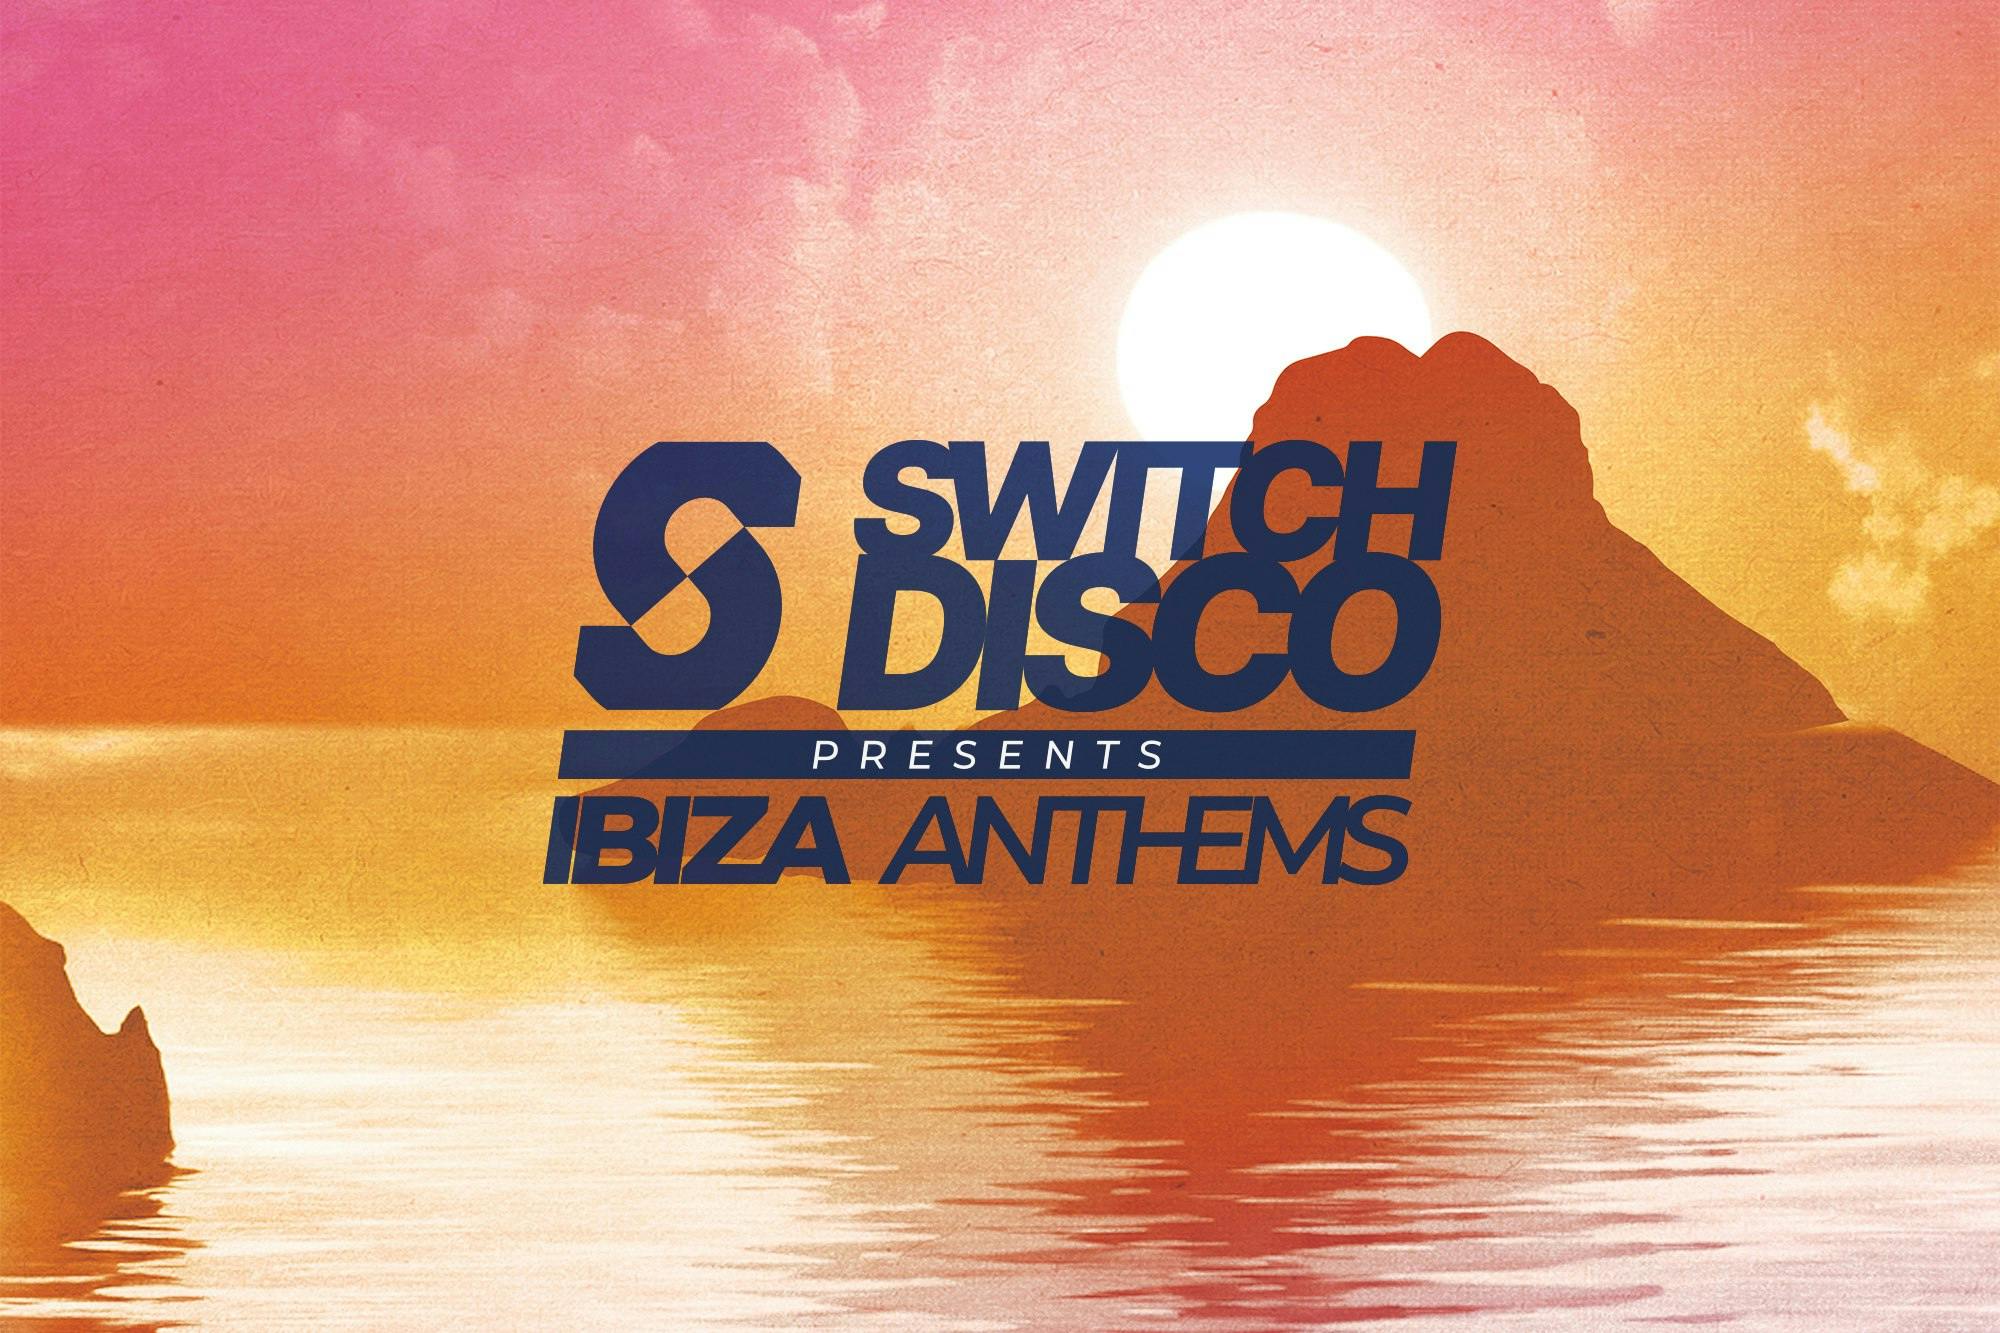 Switch Disco presents Ibiza Anthems CLOSING PARTY